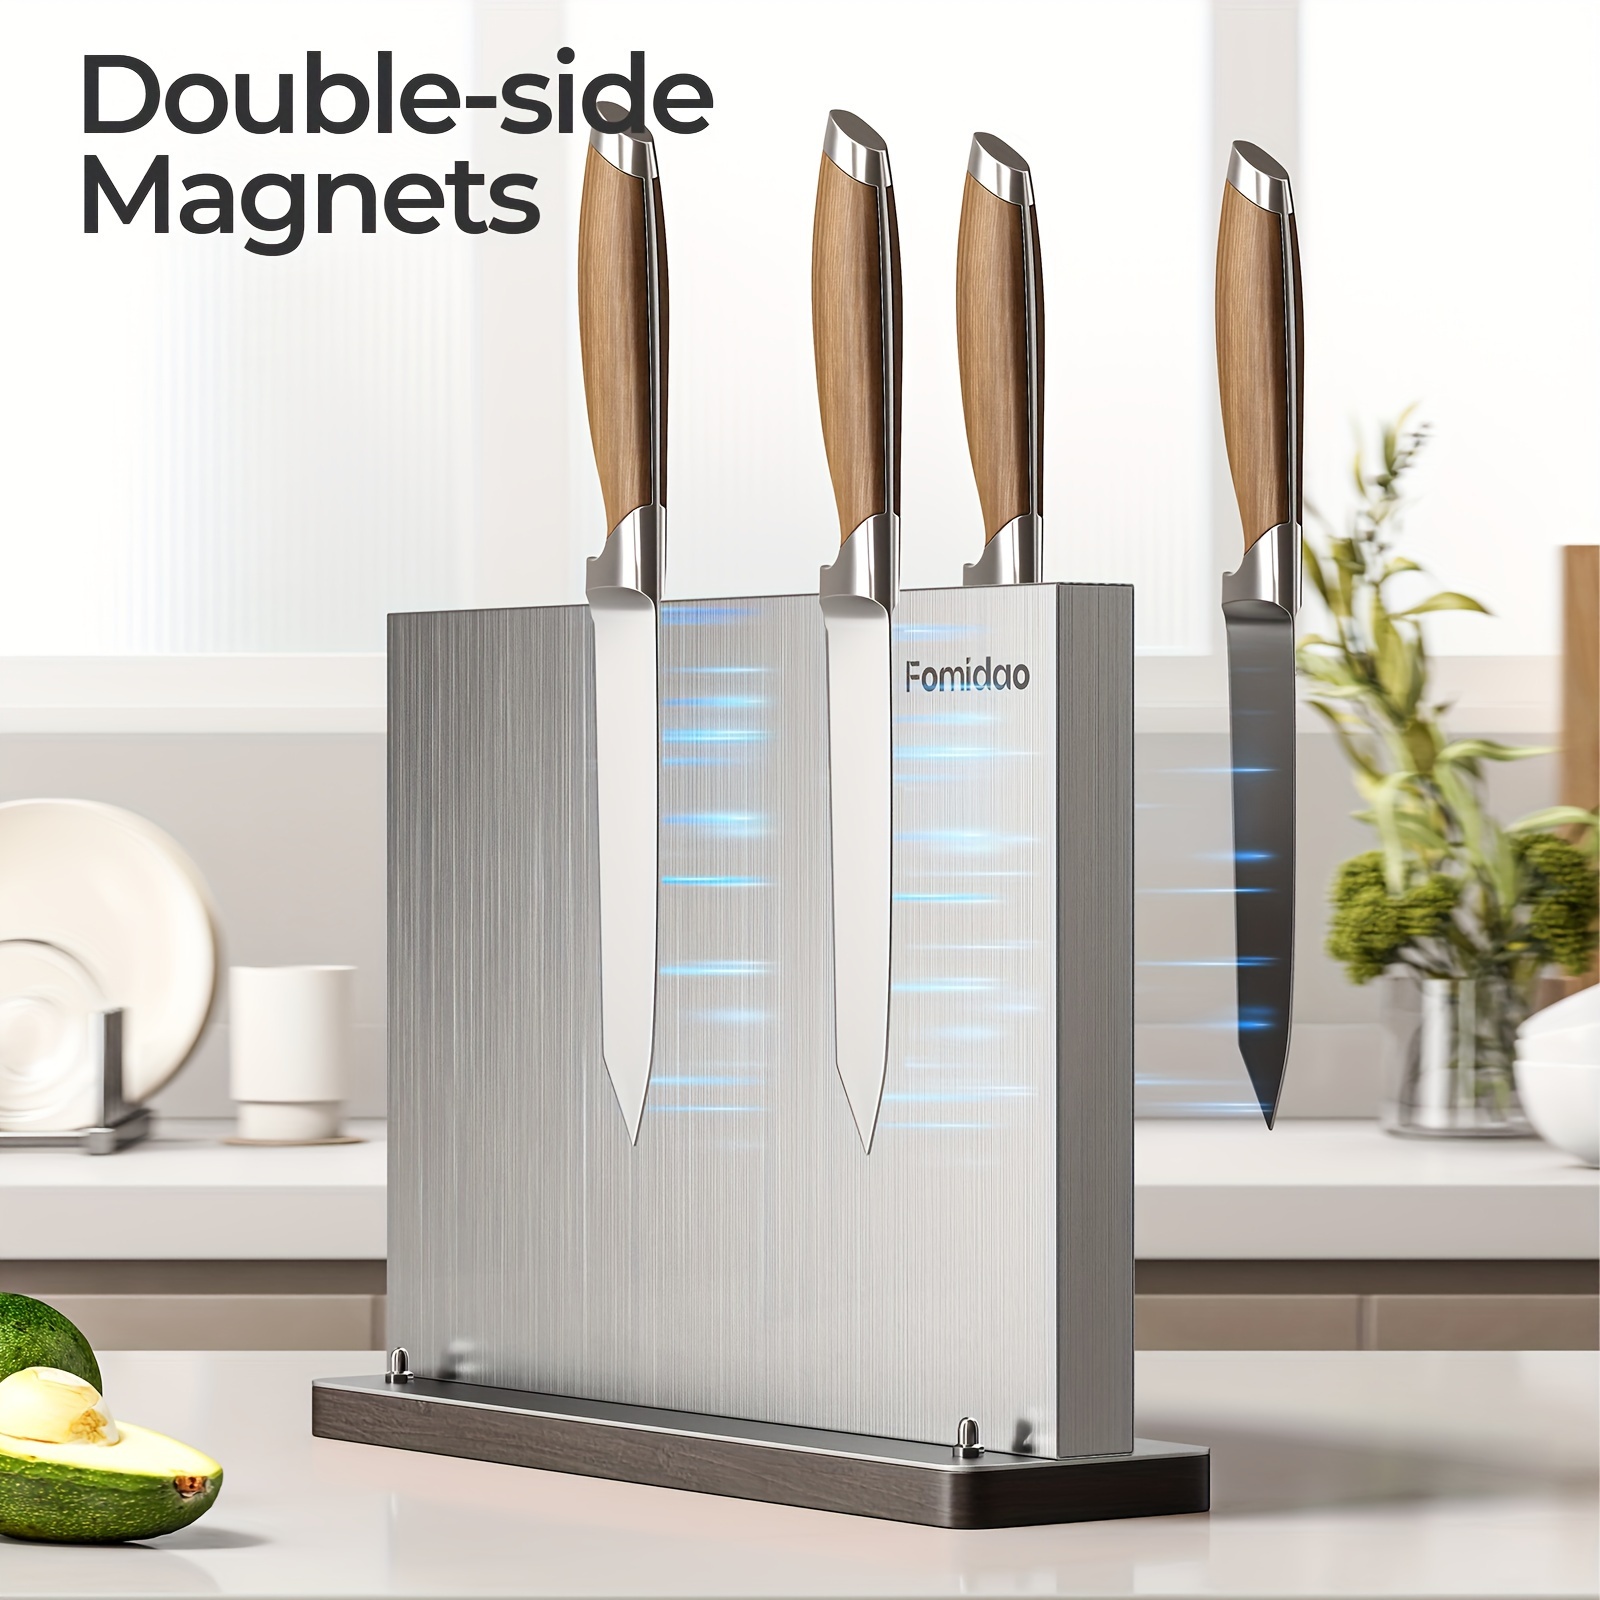 

Magnetic Knife Block, Stainless Steel Magnetic Knife Holder Rack For Kitchen Counter, Strong Double Sided Magnet Knife Storage Stand With Wood Base